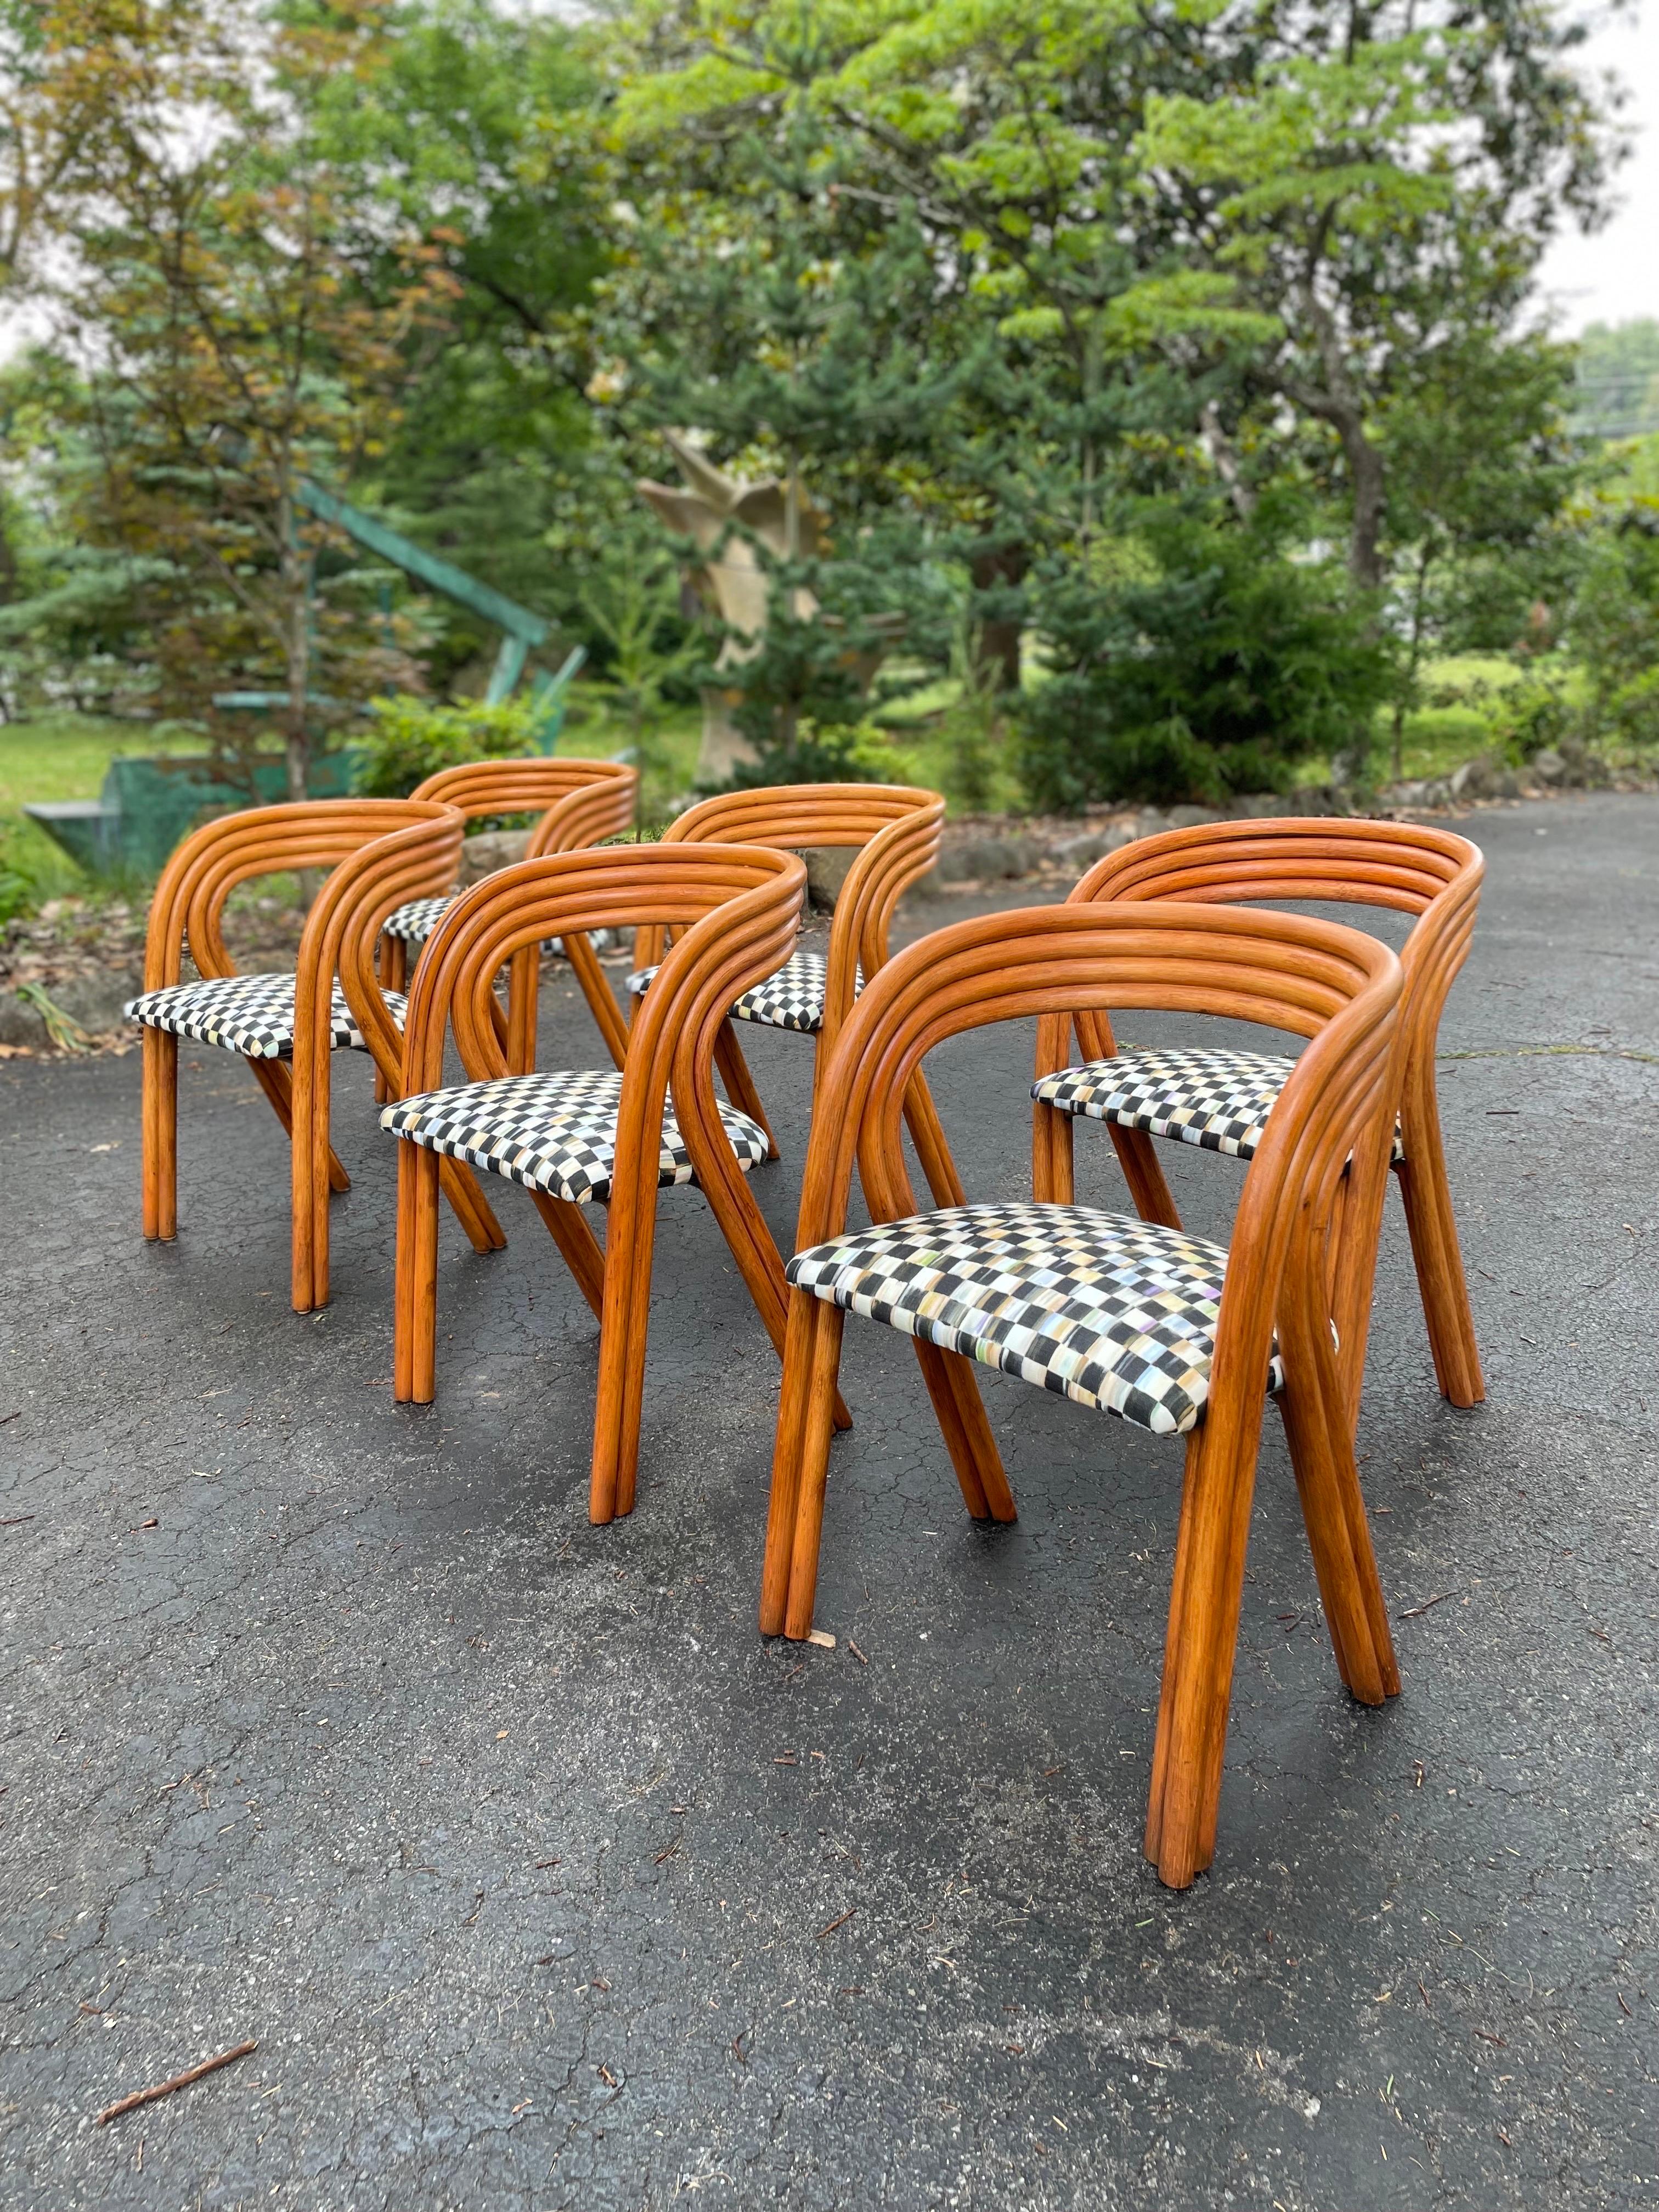 This set of six 1970s dining chairs designed by Axel Enthoven for Rohe is a true gem. The chairs have been professionally upholstered in a playful yet sophisticated Mackenzie Childs checkered fabric that will add a touch of whimsy to any dining